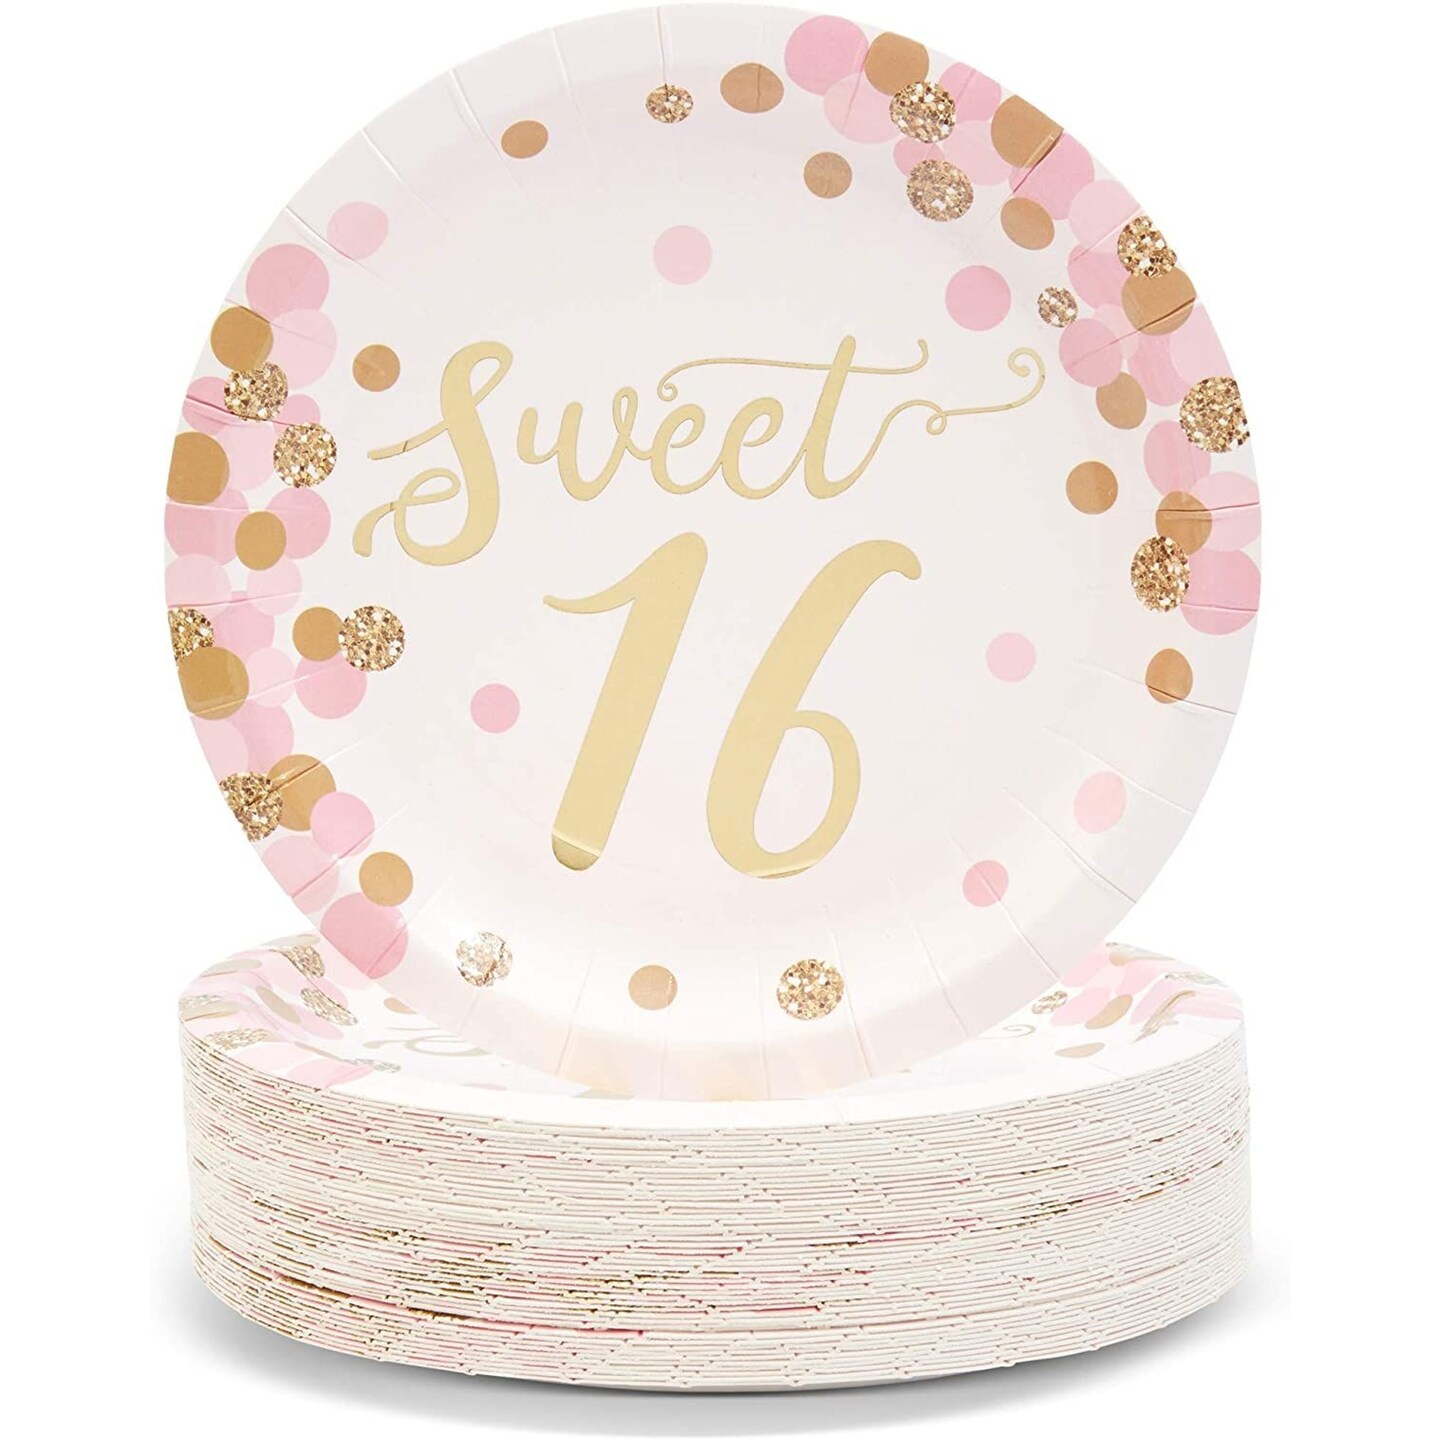 48-Pack Sweet 16 Party Paper Plates, Rose Gold 16th Birthday Supplies (7 in)